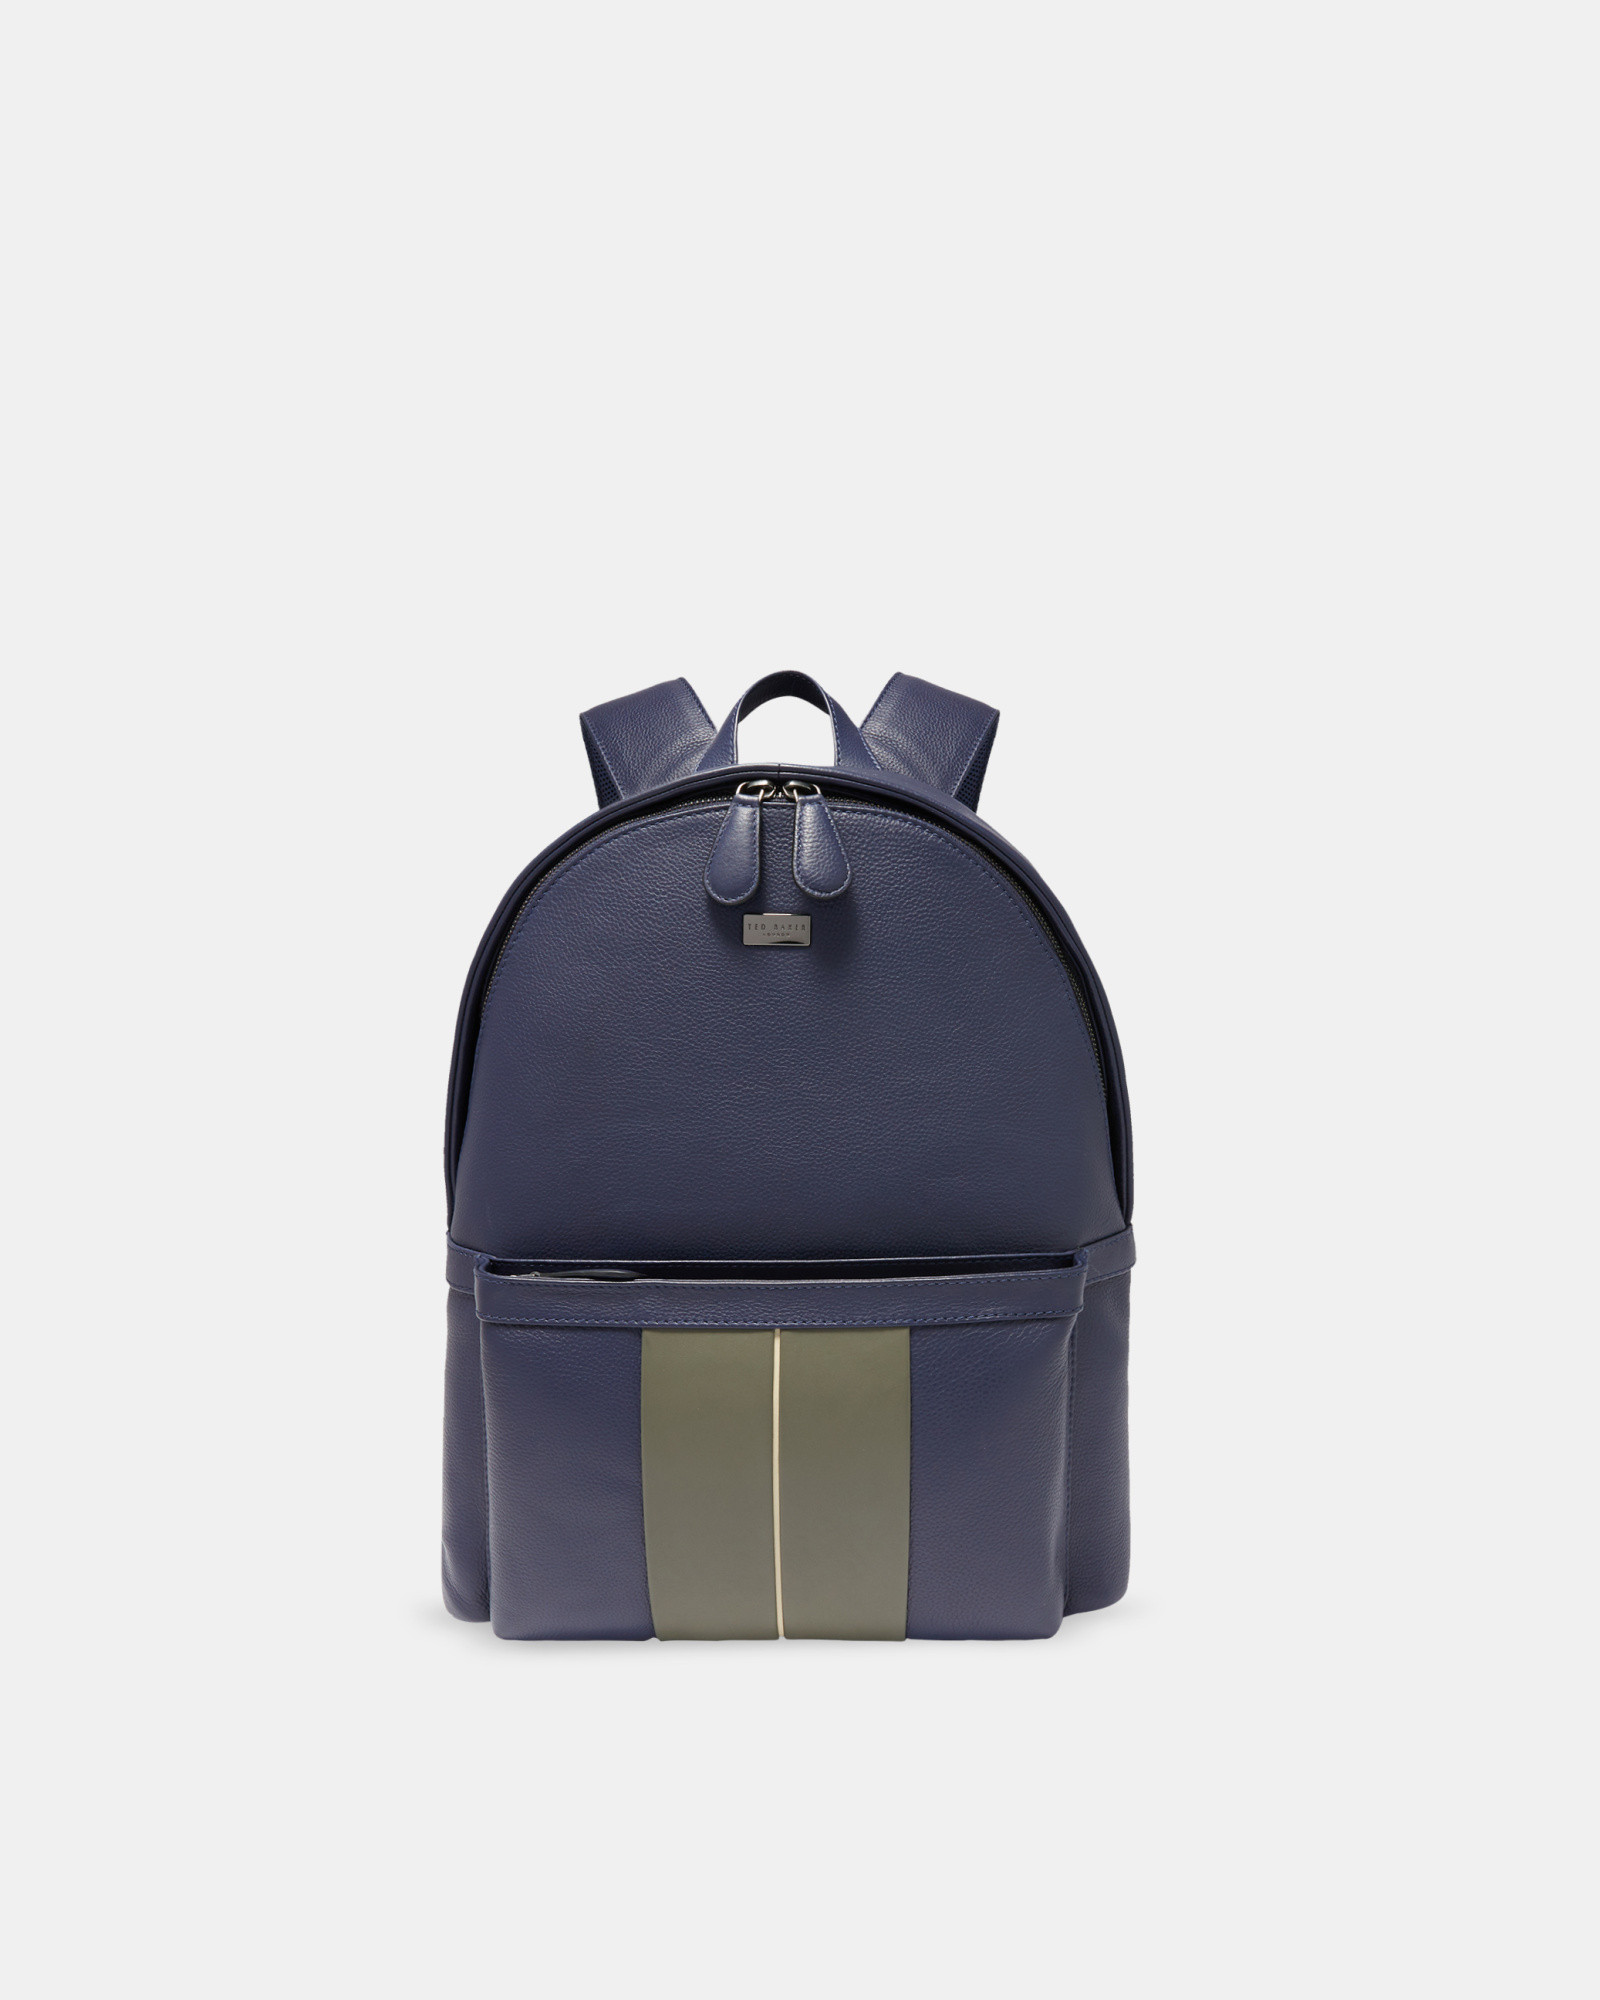 BREADS Striped leather backpack